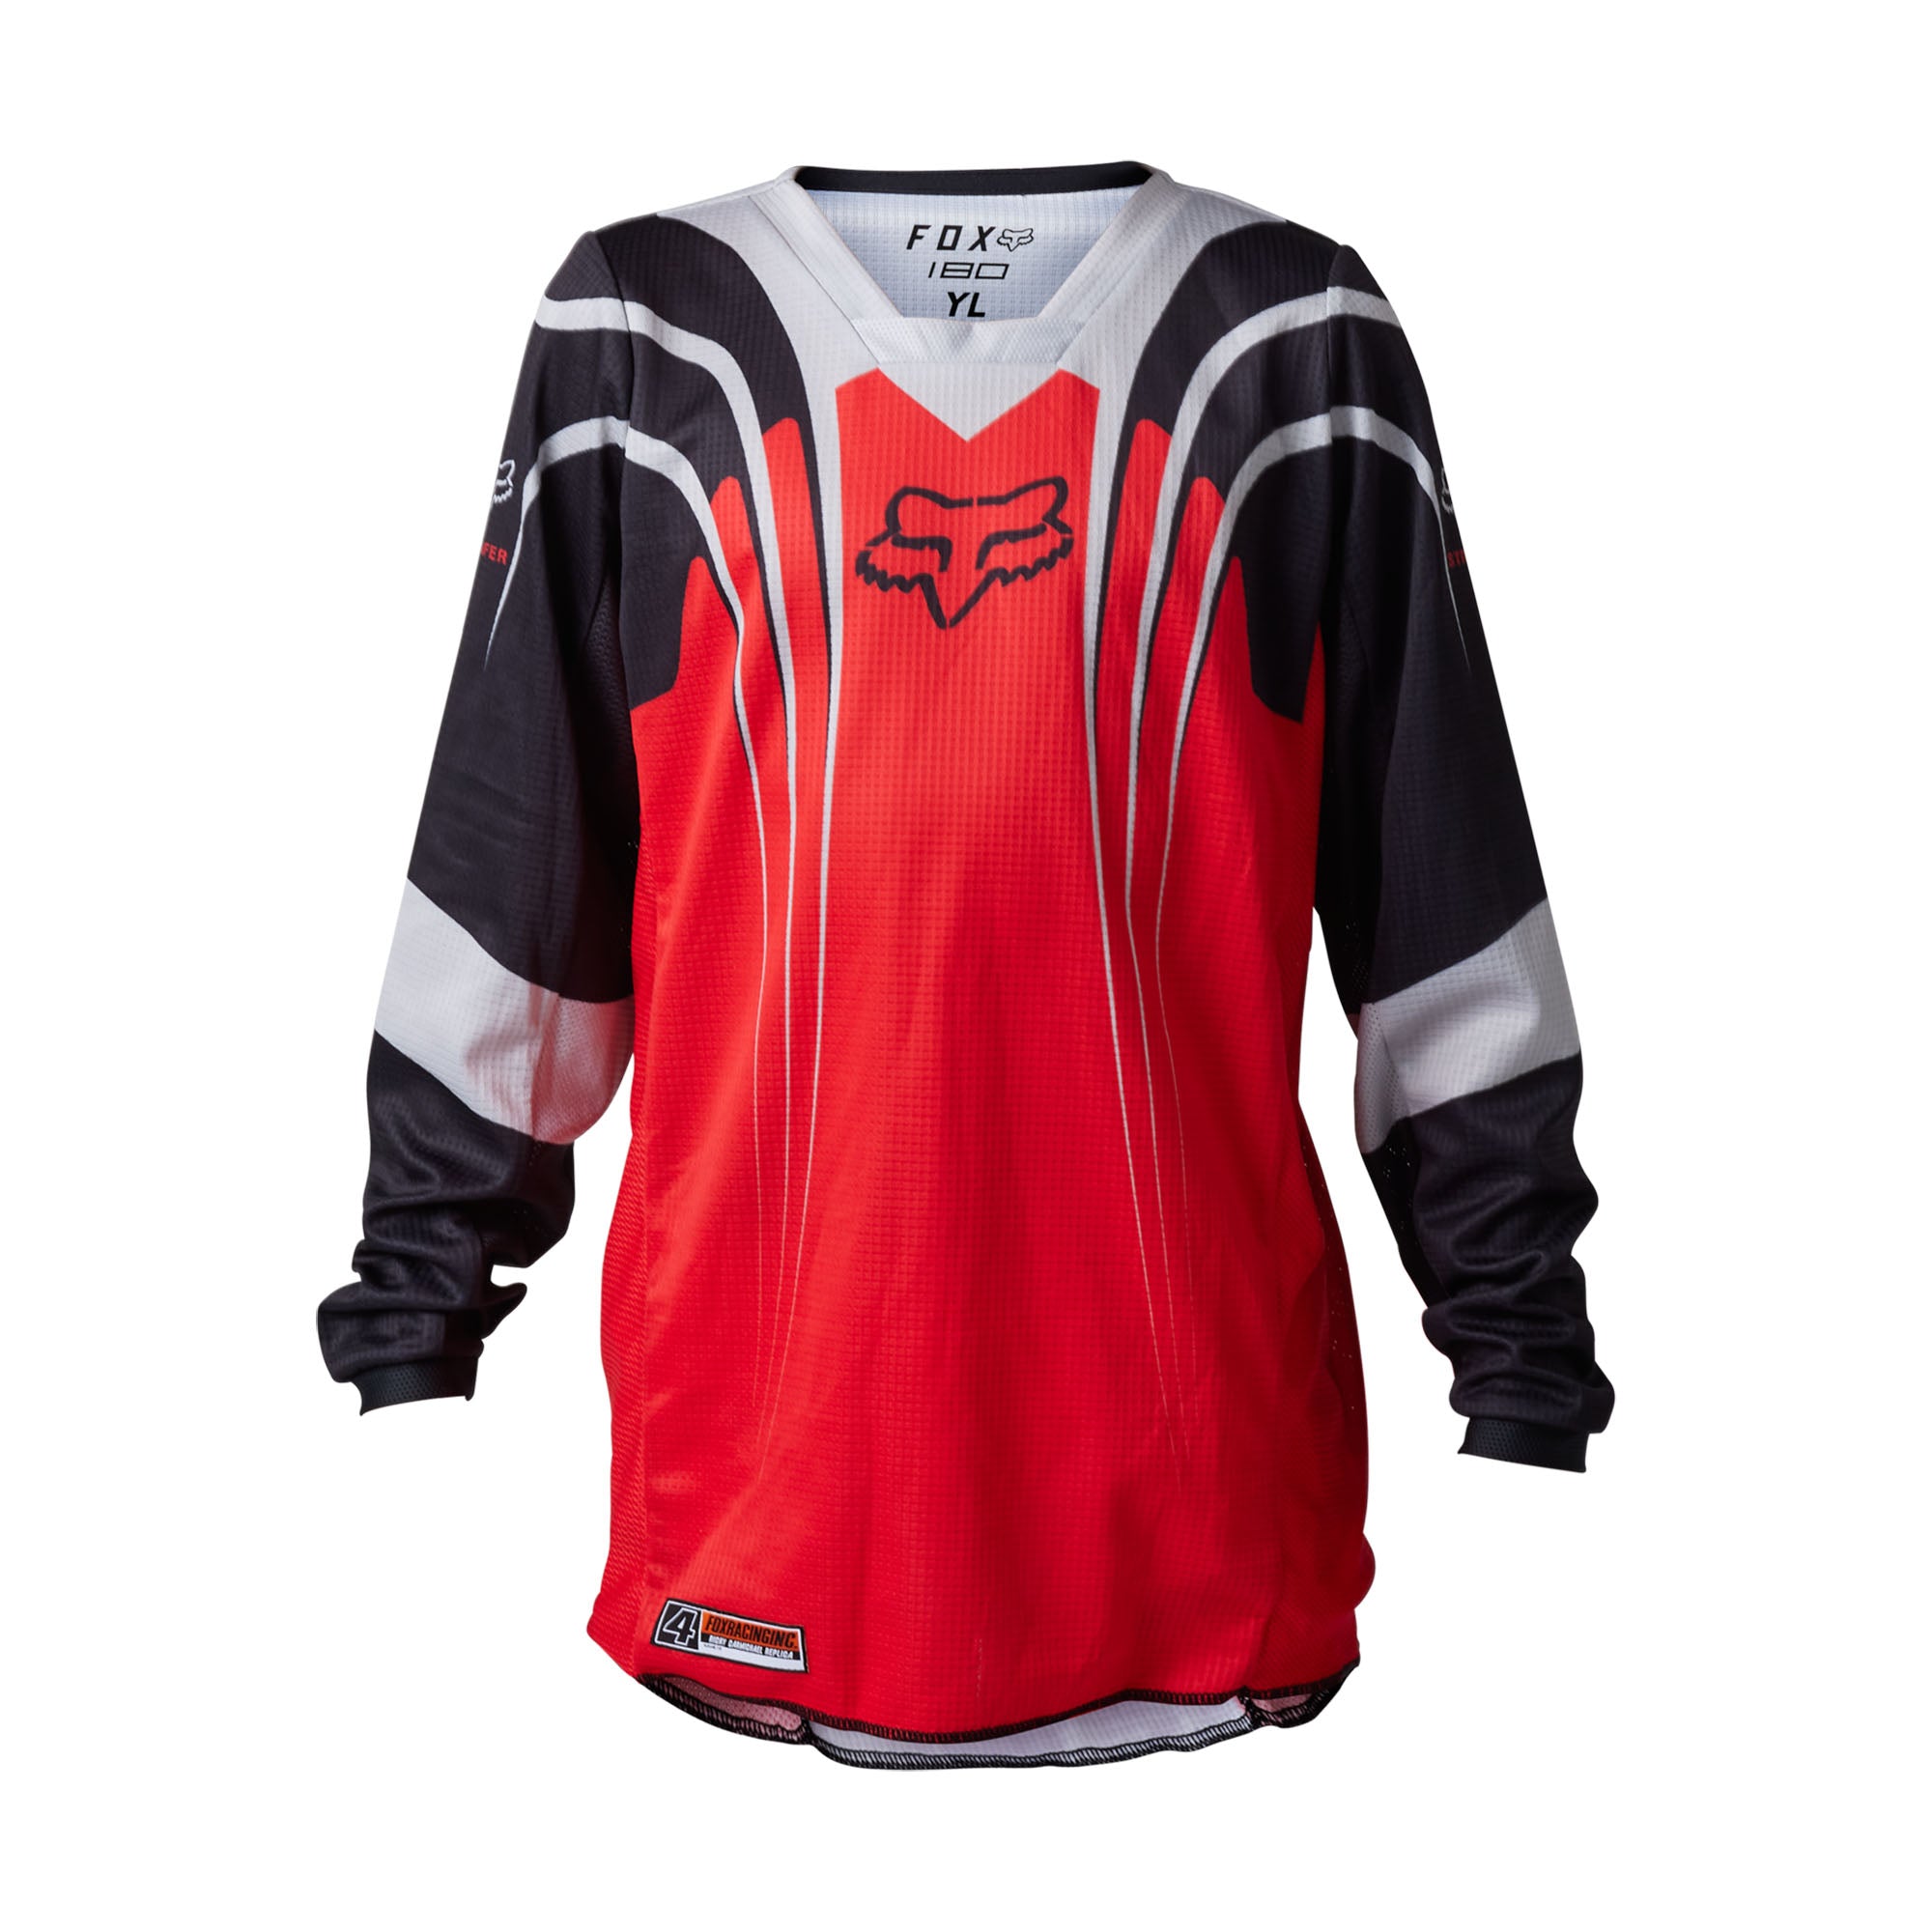 Fox Racing 180 Youth GOAT Strafer Jersey